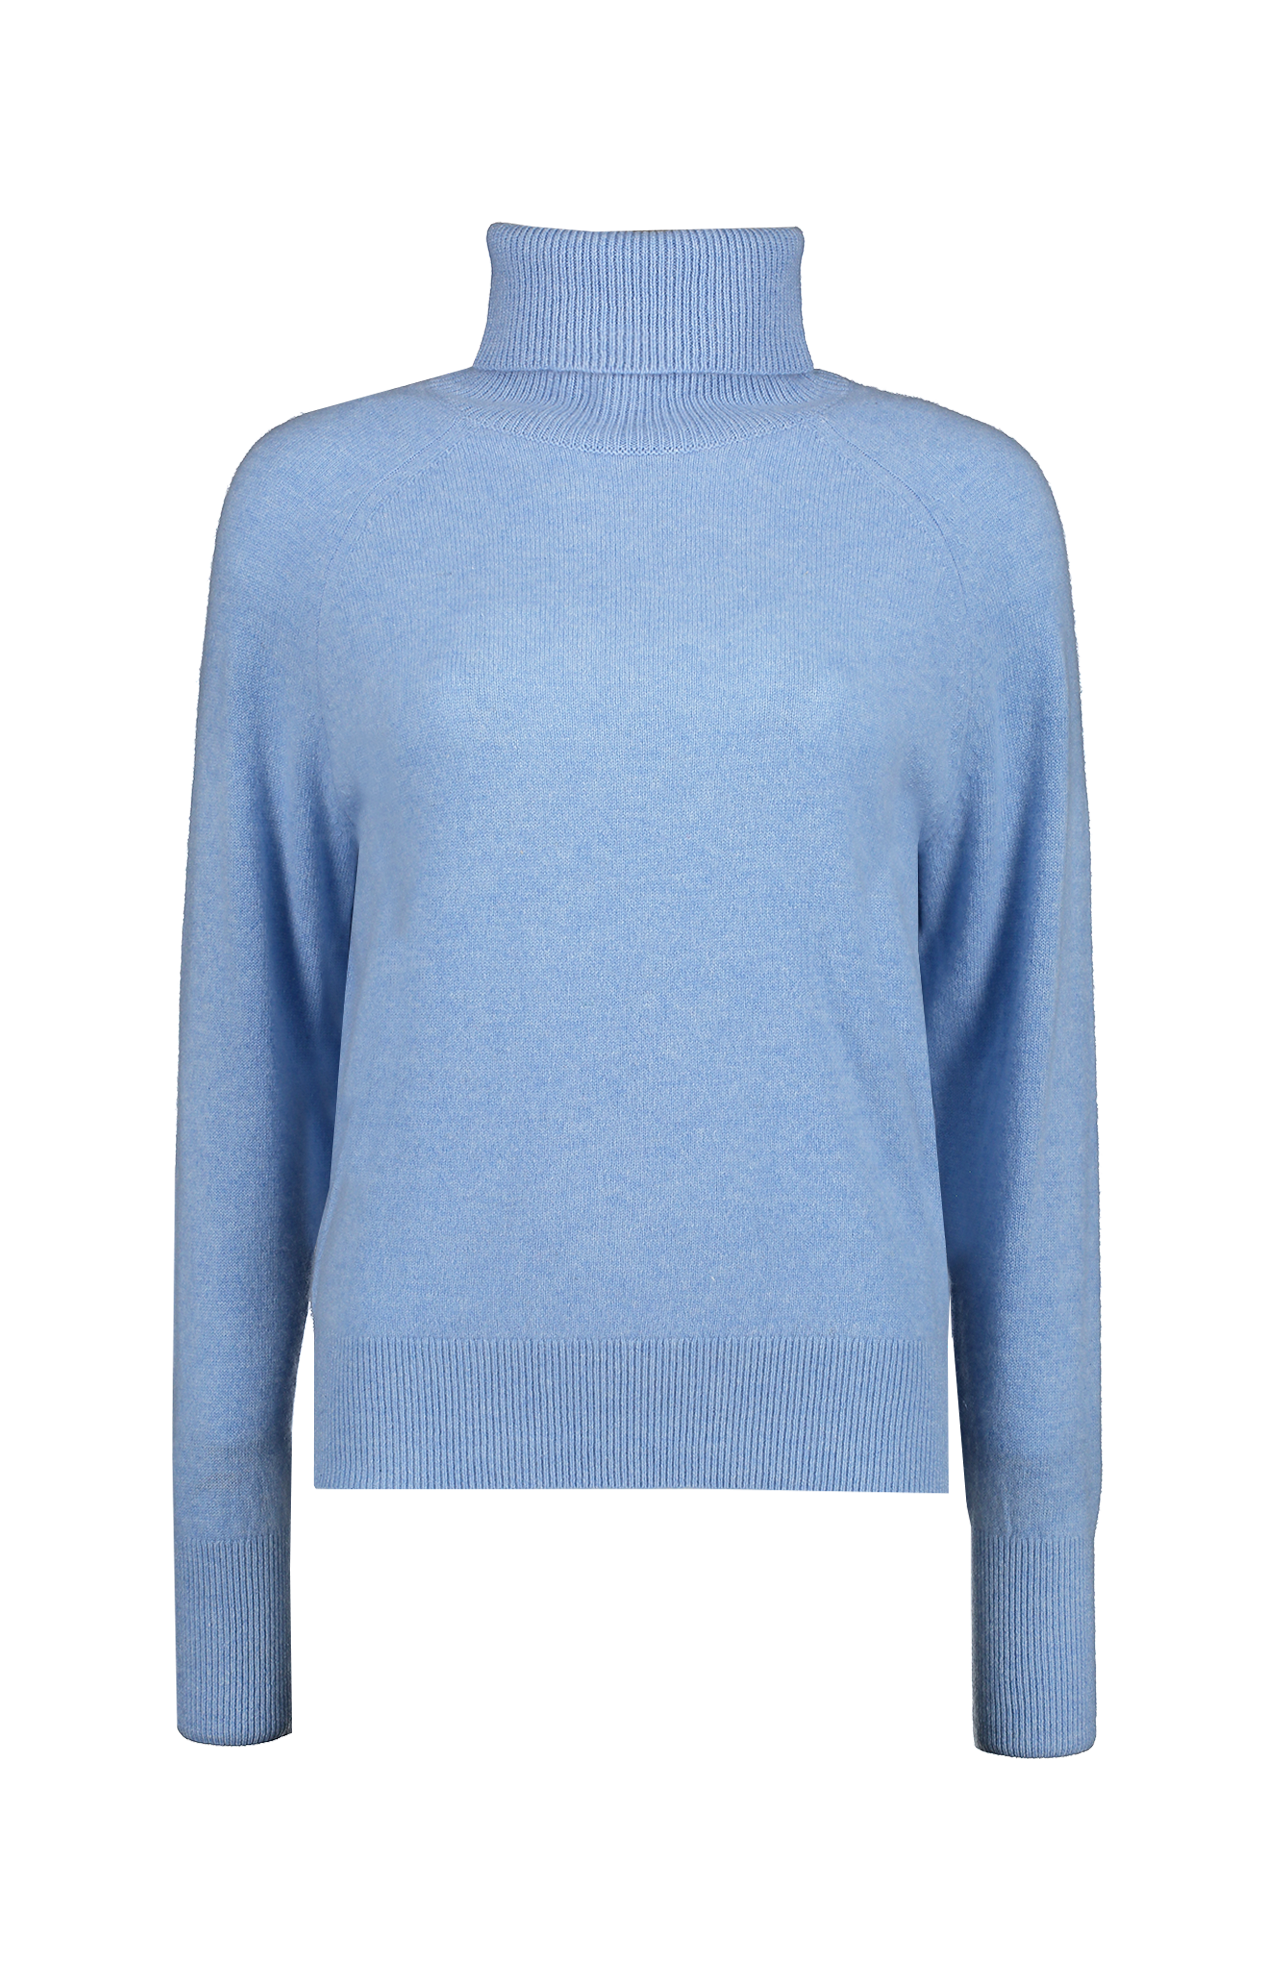 White And Warren Cashmere Essential Turtleneck Sweater Light Chambray Heather Front Mannequin Image (6977567096947)